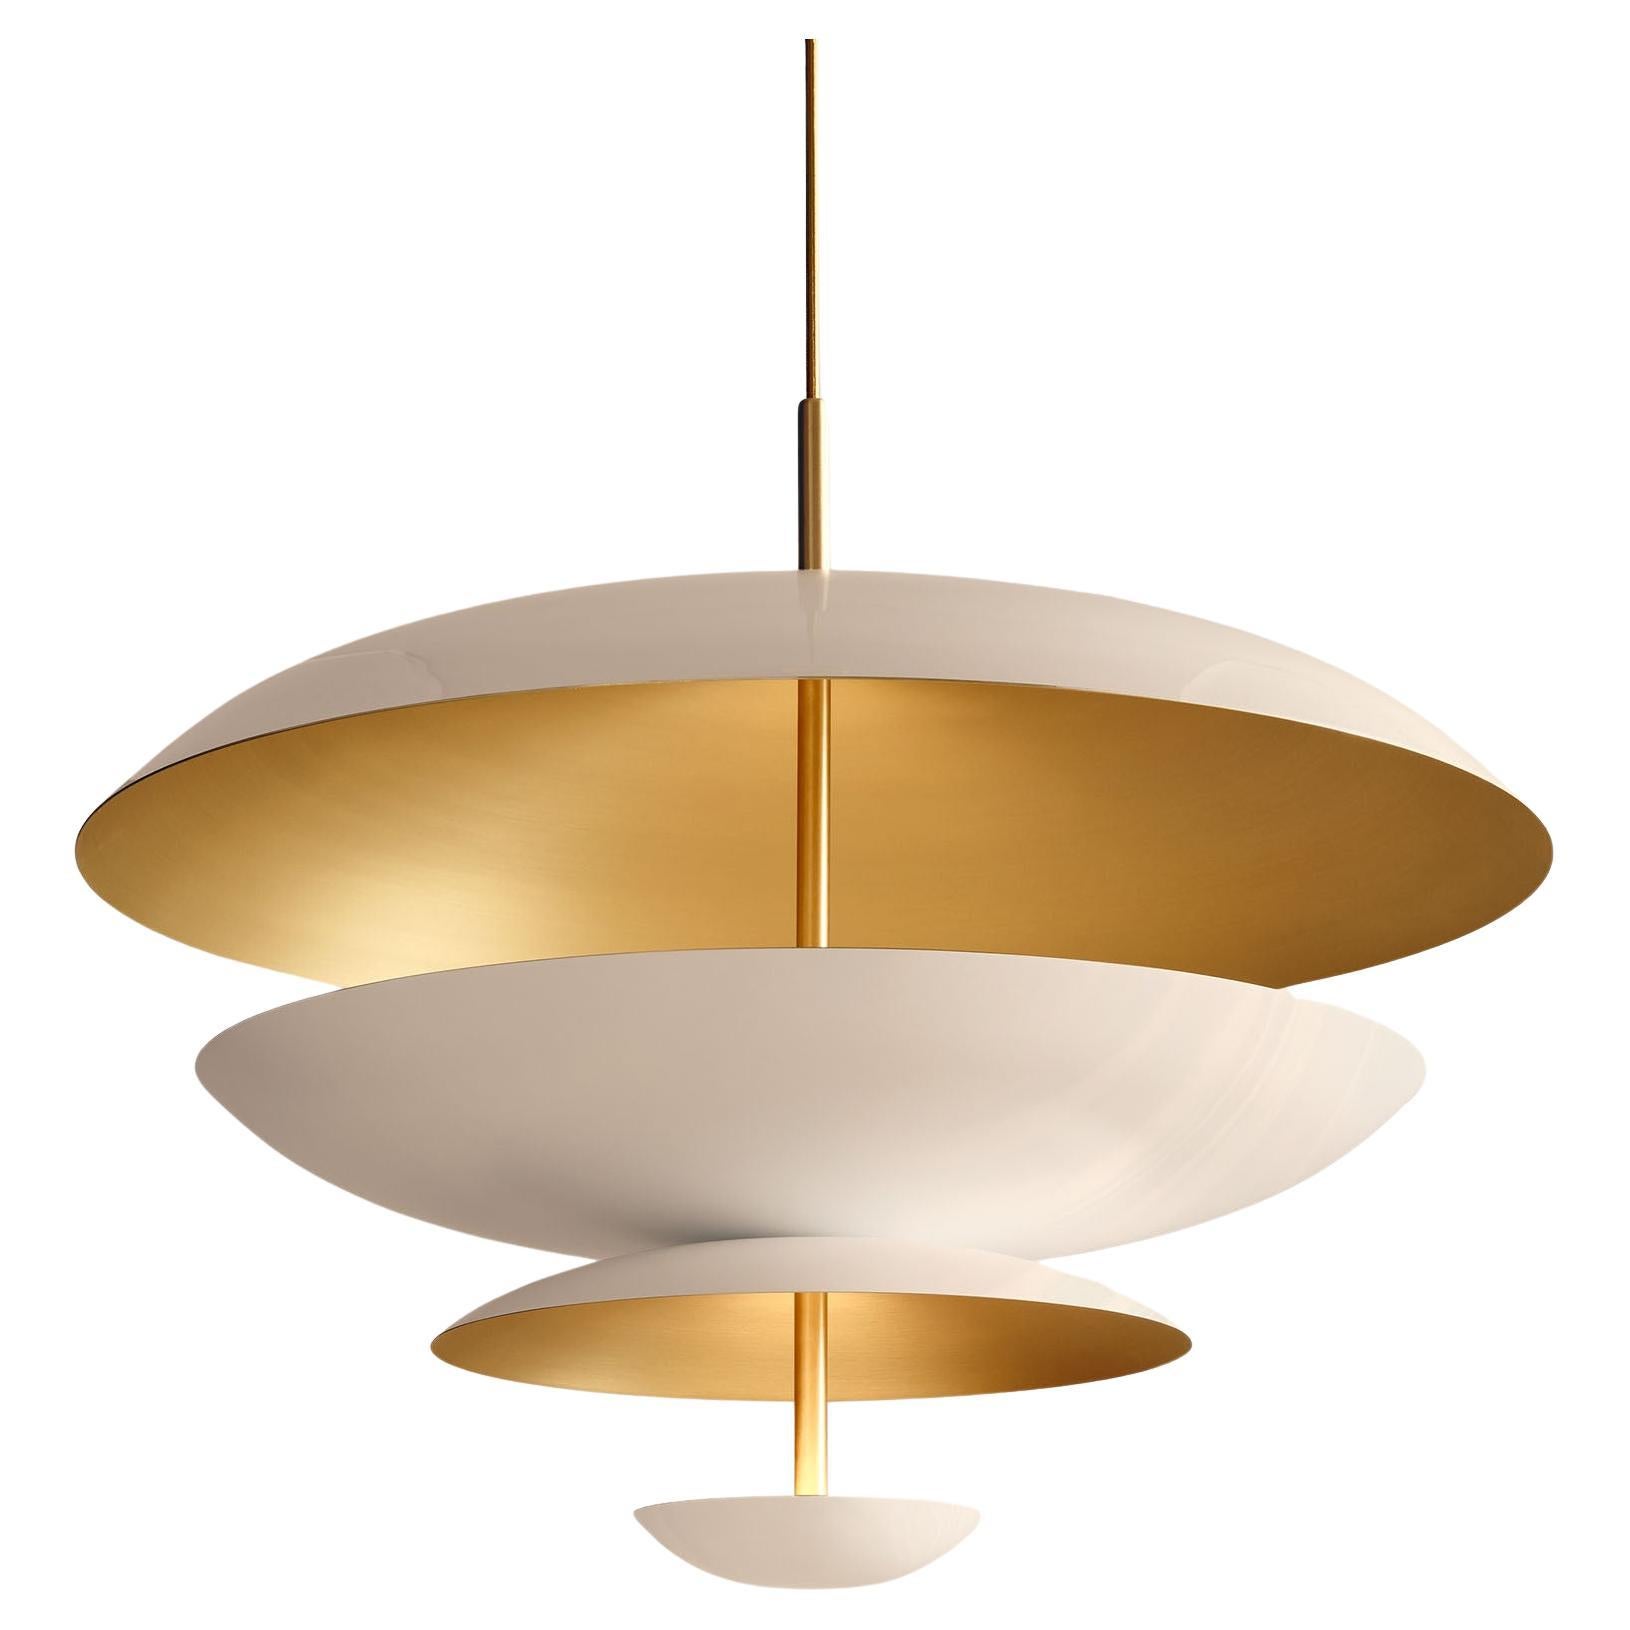 'Cosmic Purion Chandelier 100' Handmade Piano Lacquered Brass Ceiling Light For Sale